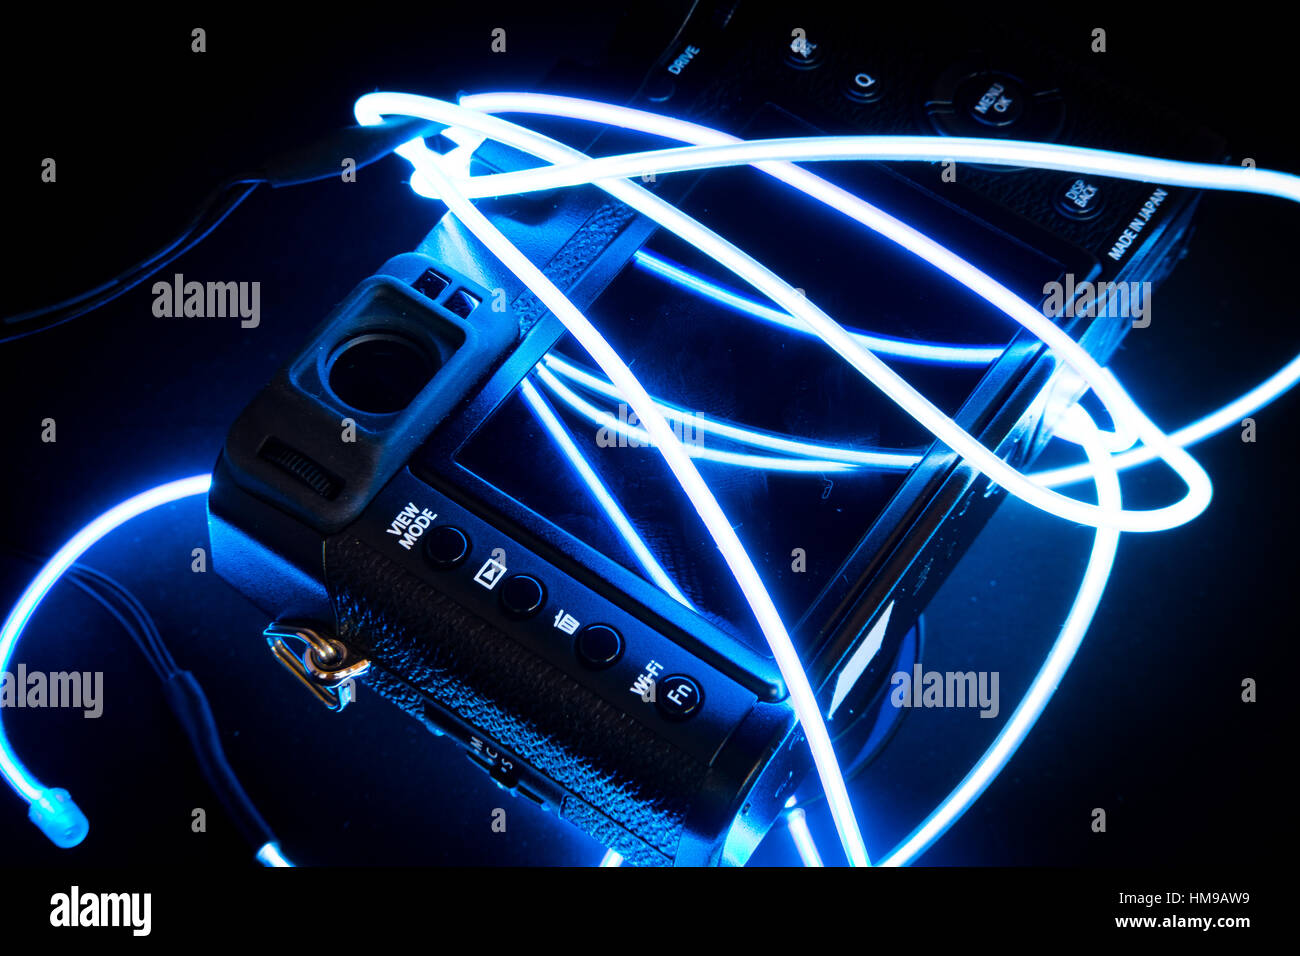 High-end digital camera lit by neon lights Stock Photo